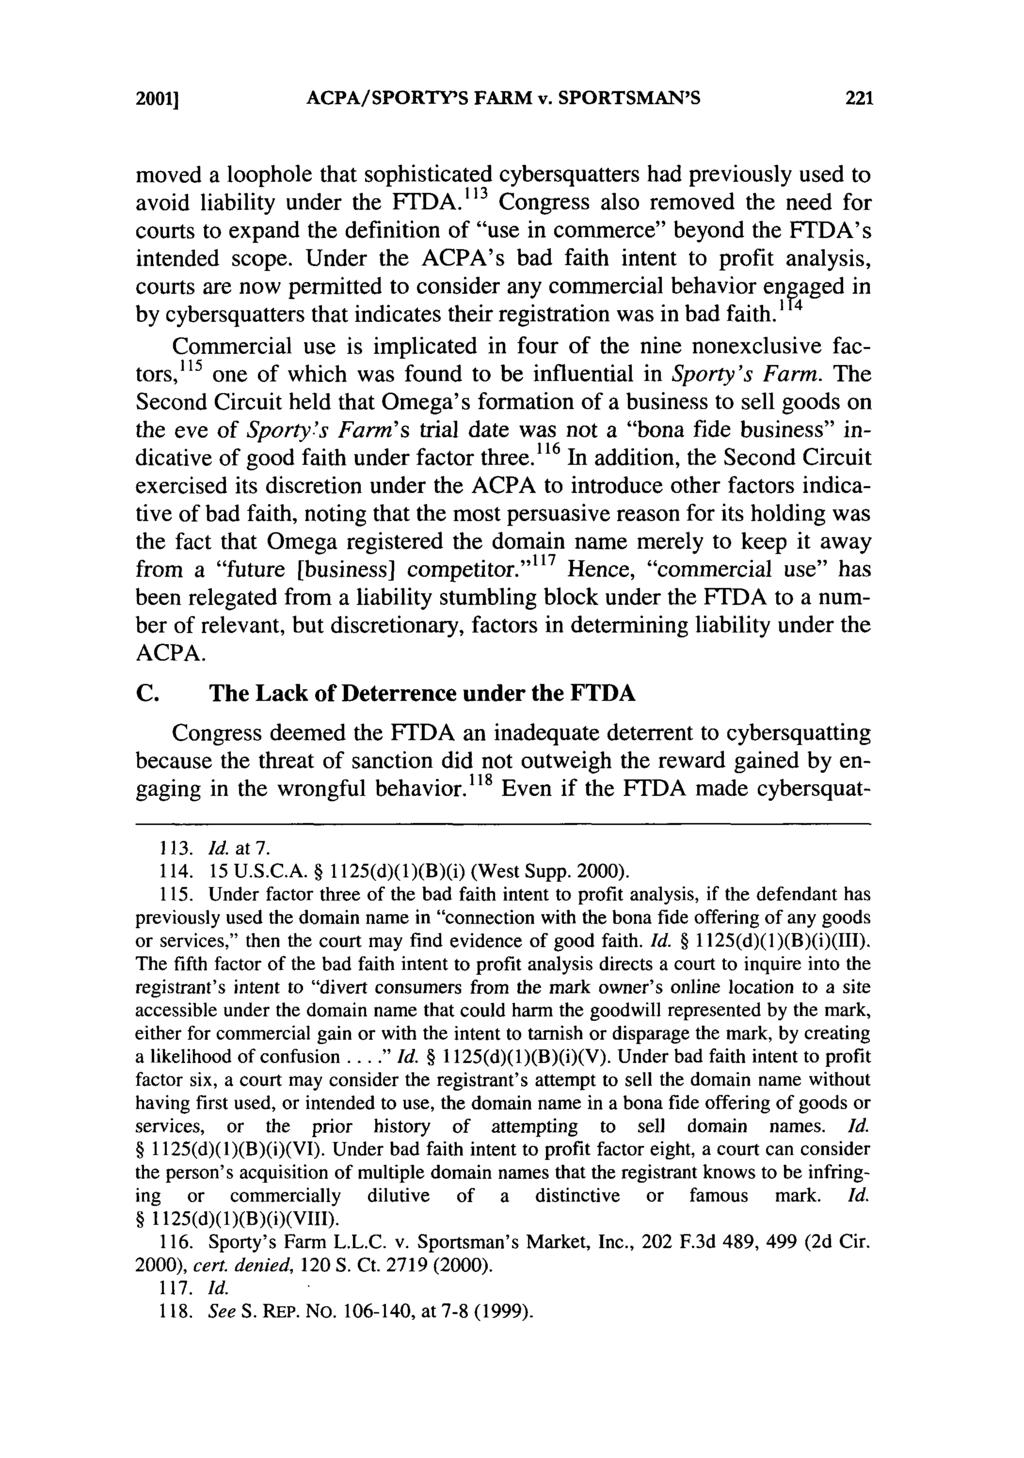 20011 ACPA/SPORTY'S FARM v. SPORTSMAN'S moved a loophole that sophisticated cybersquatters had previously used to avoid liability under the FTDA.